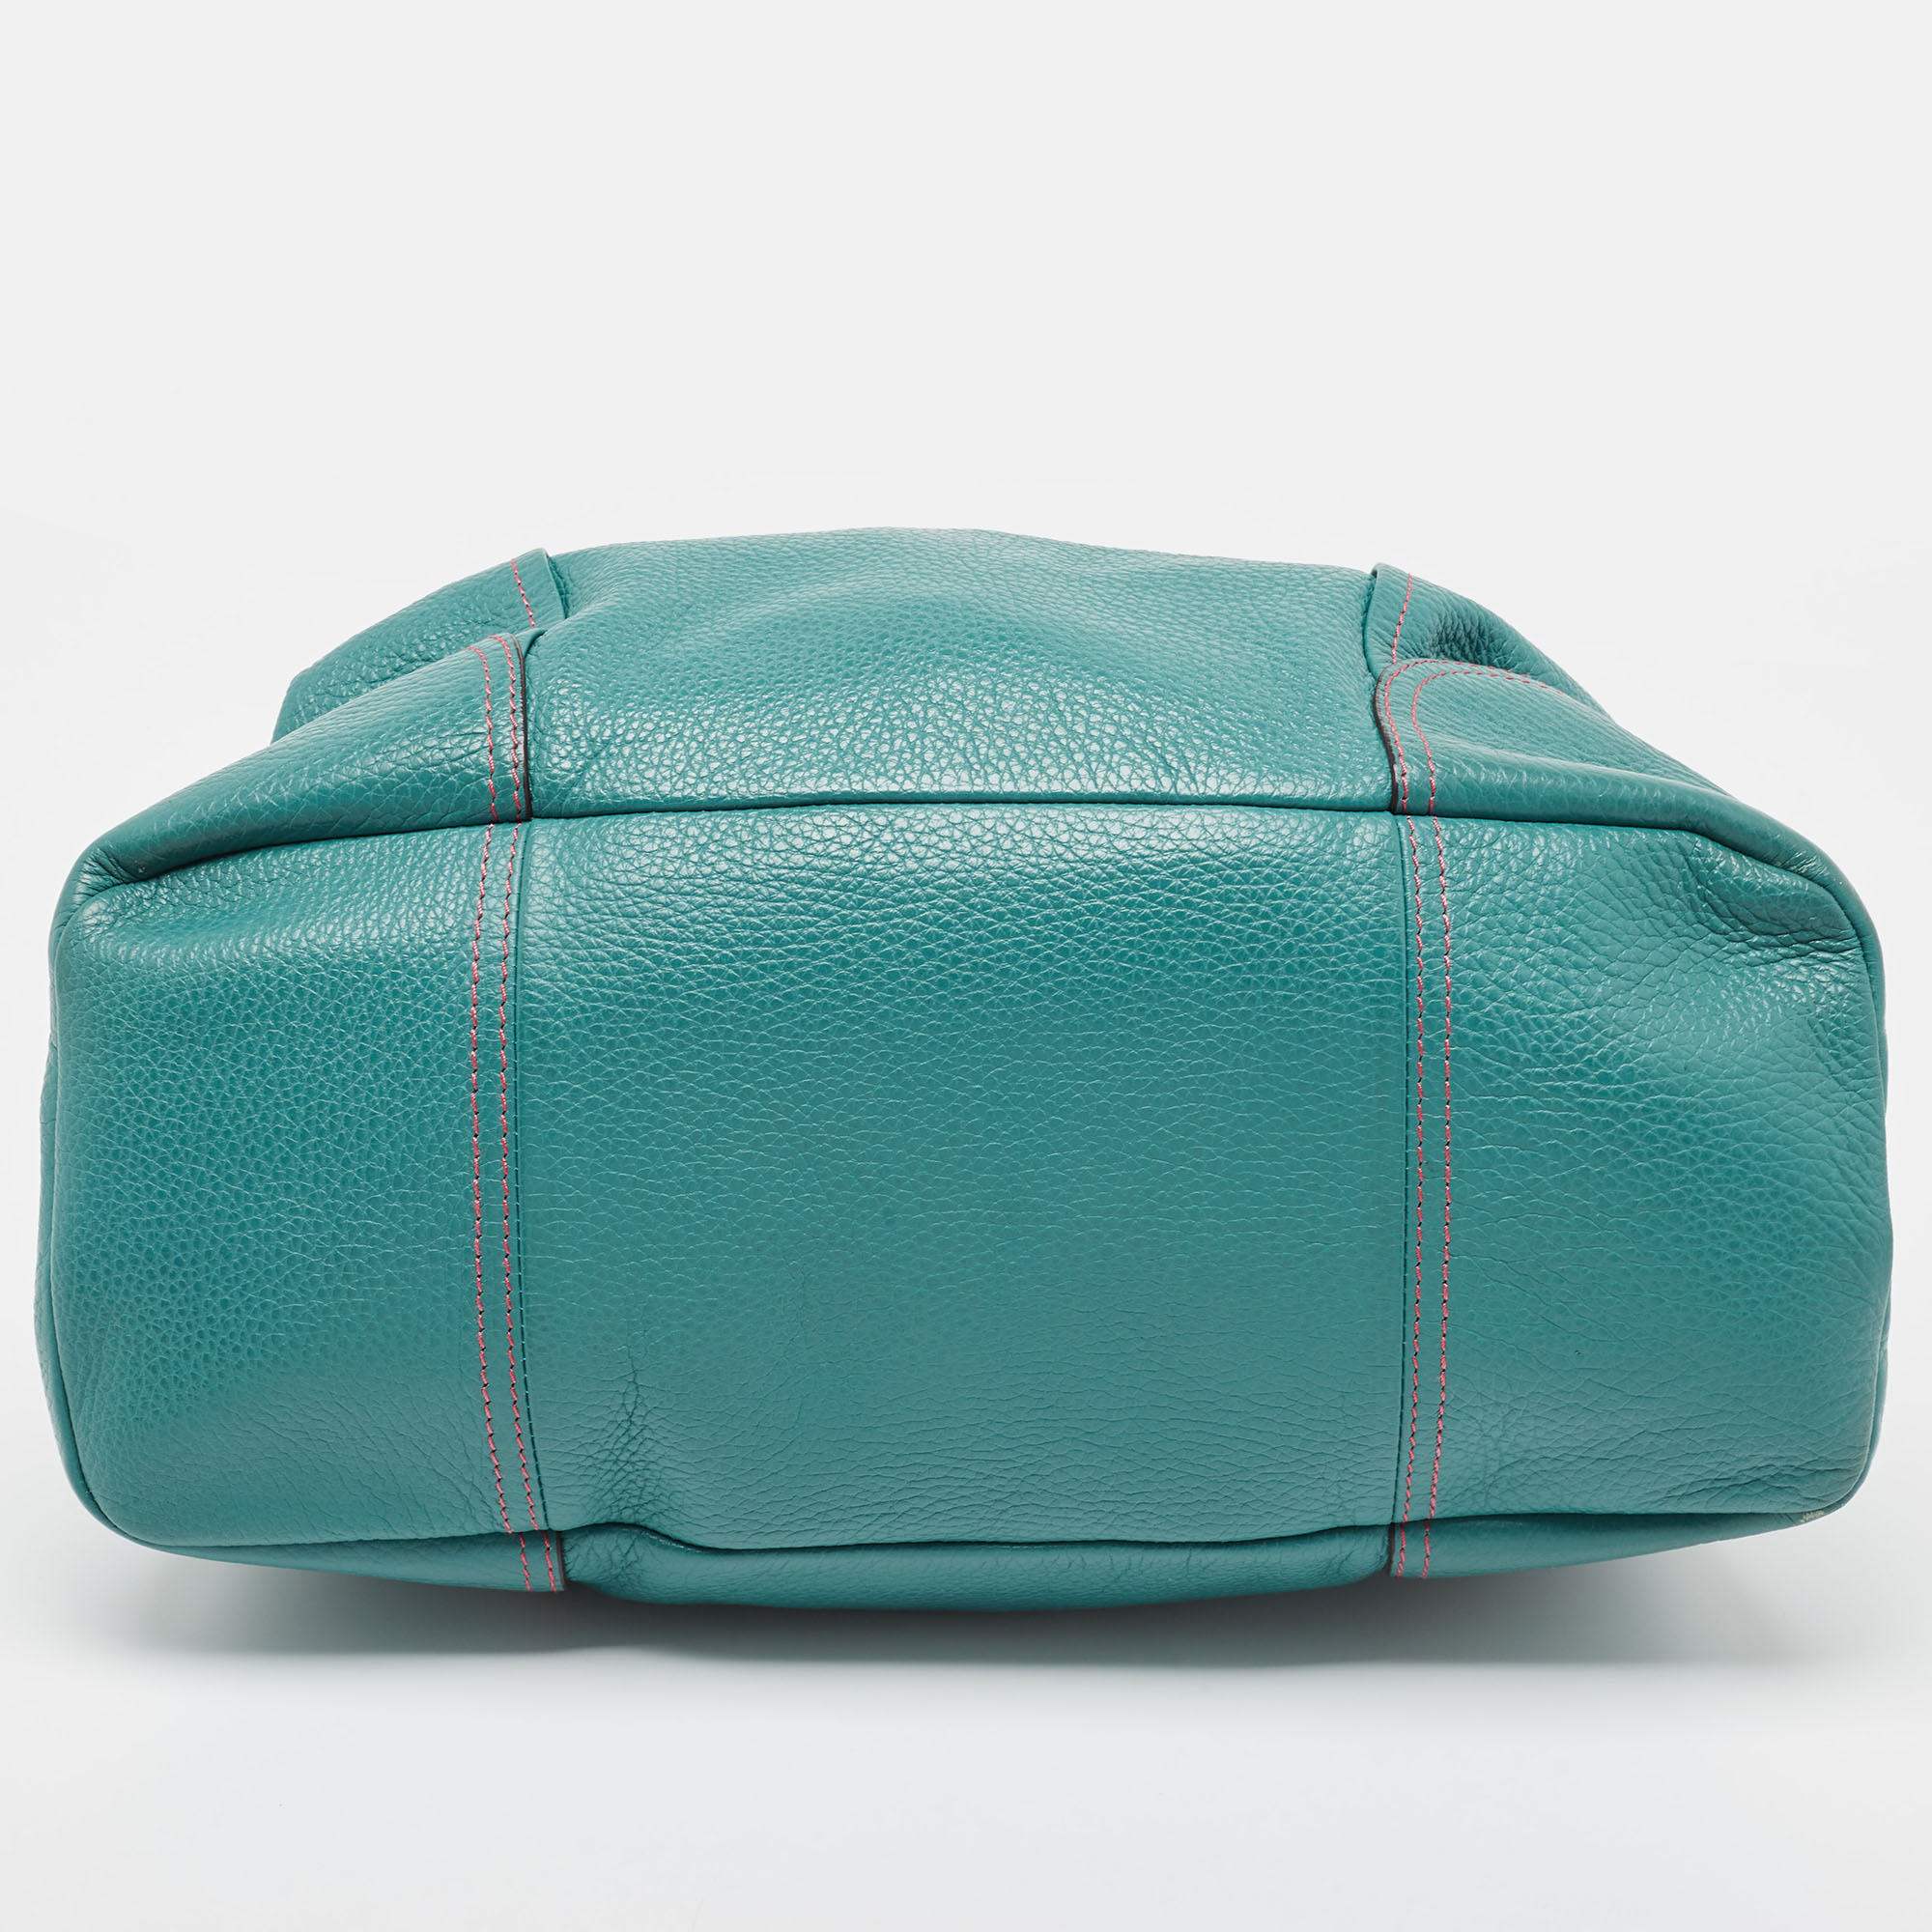 Lancel Green Leather Tote